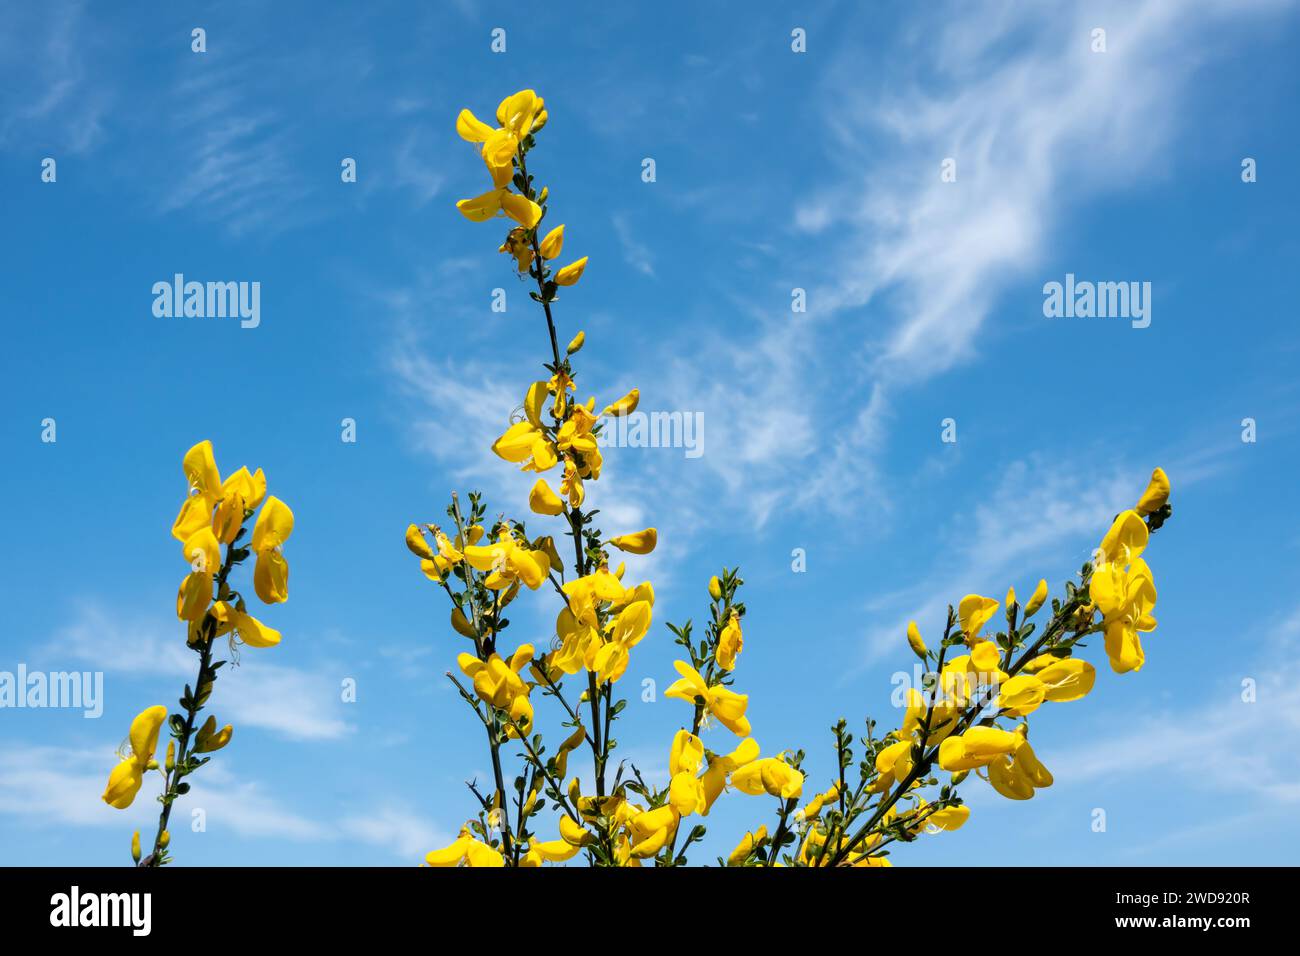 Blooming branches of common broom, Cytisus scoparius, with yellow flowers against blue sky, Netherlands Stock Photo